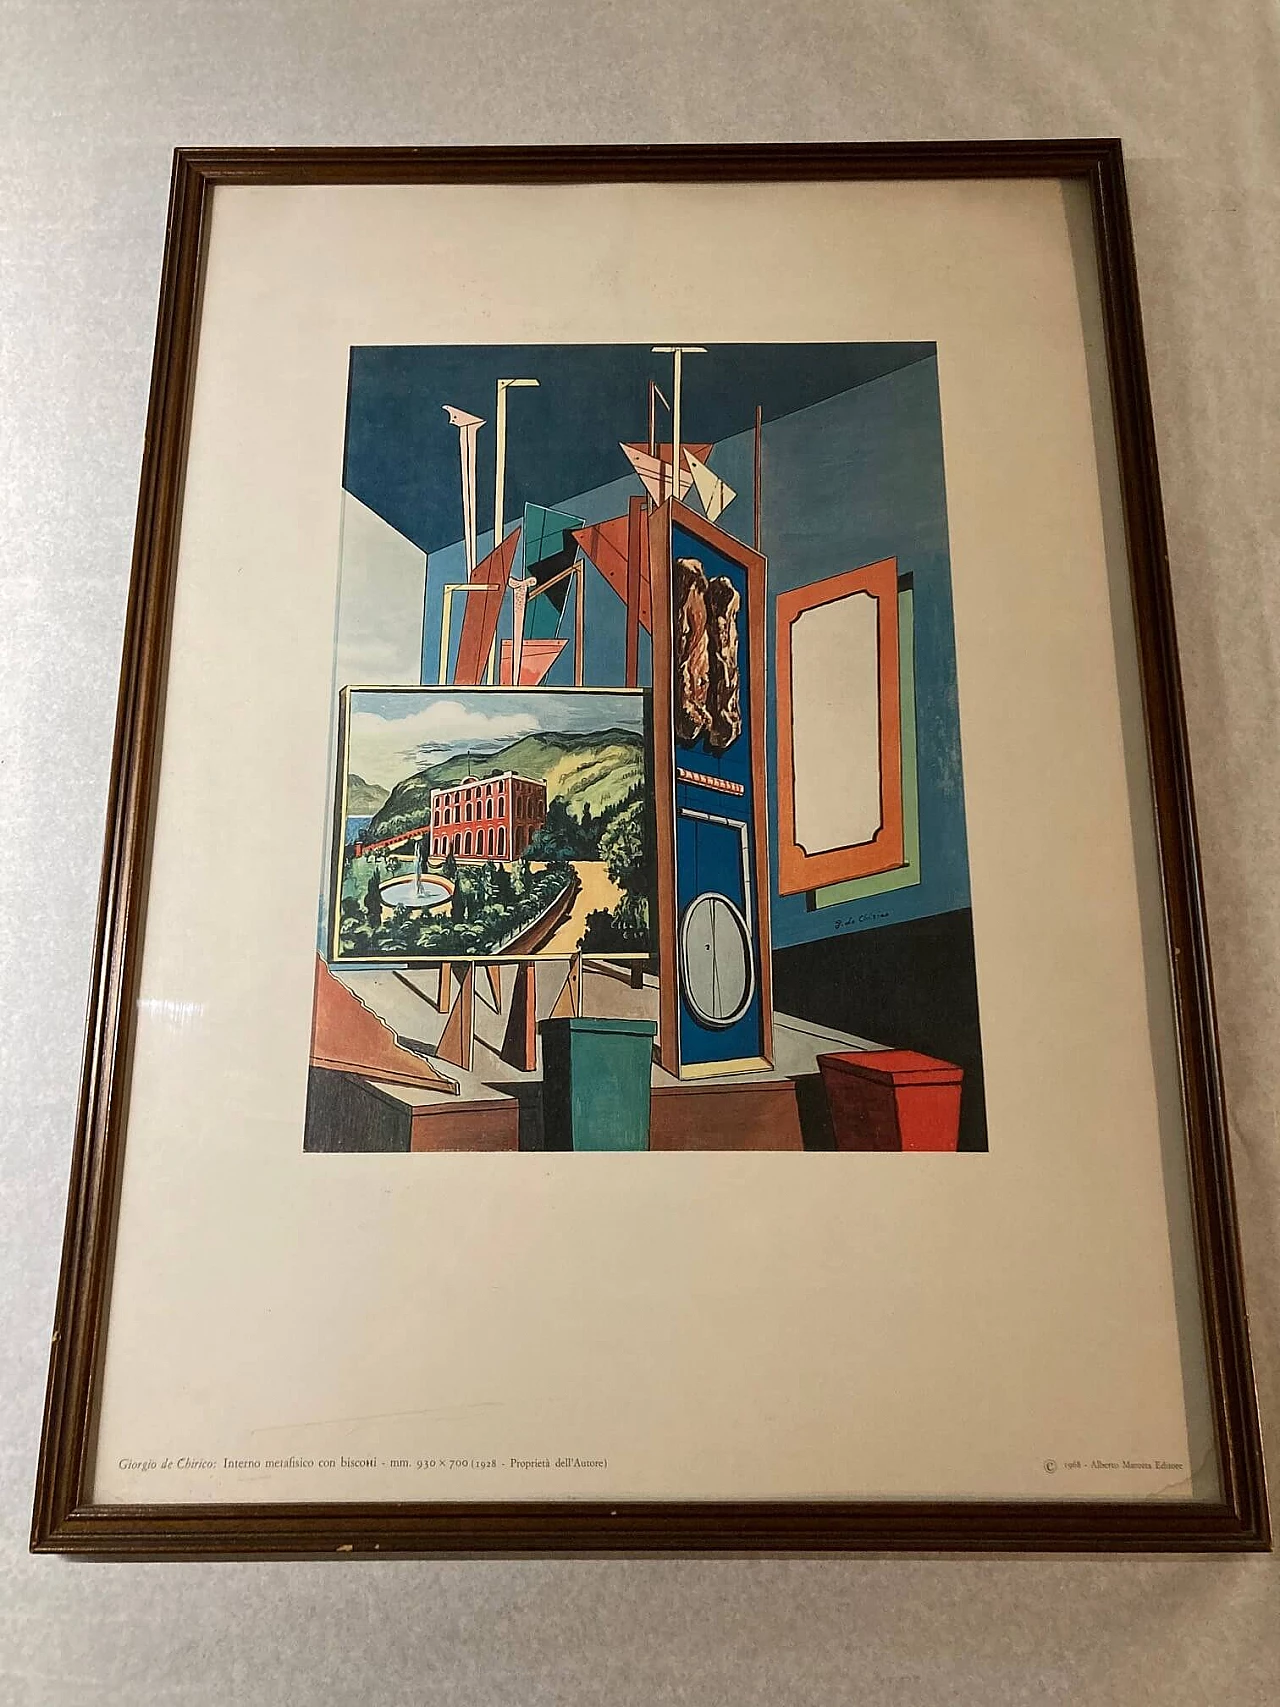 Giorgio De Chirico, Metaphysical interior with biscuits, lithography, 1968 15